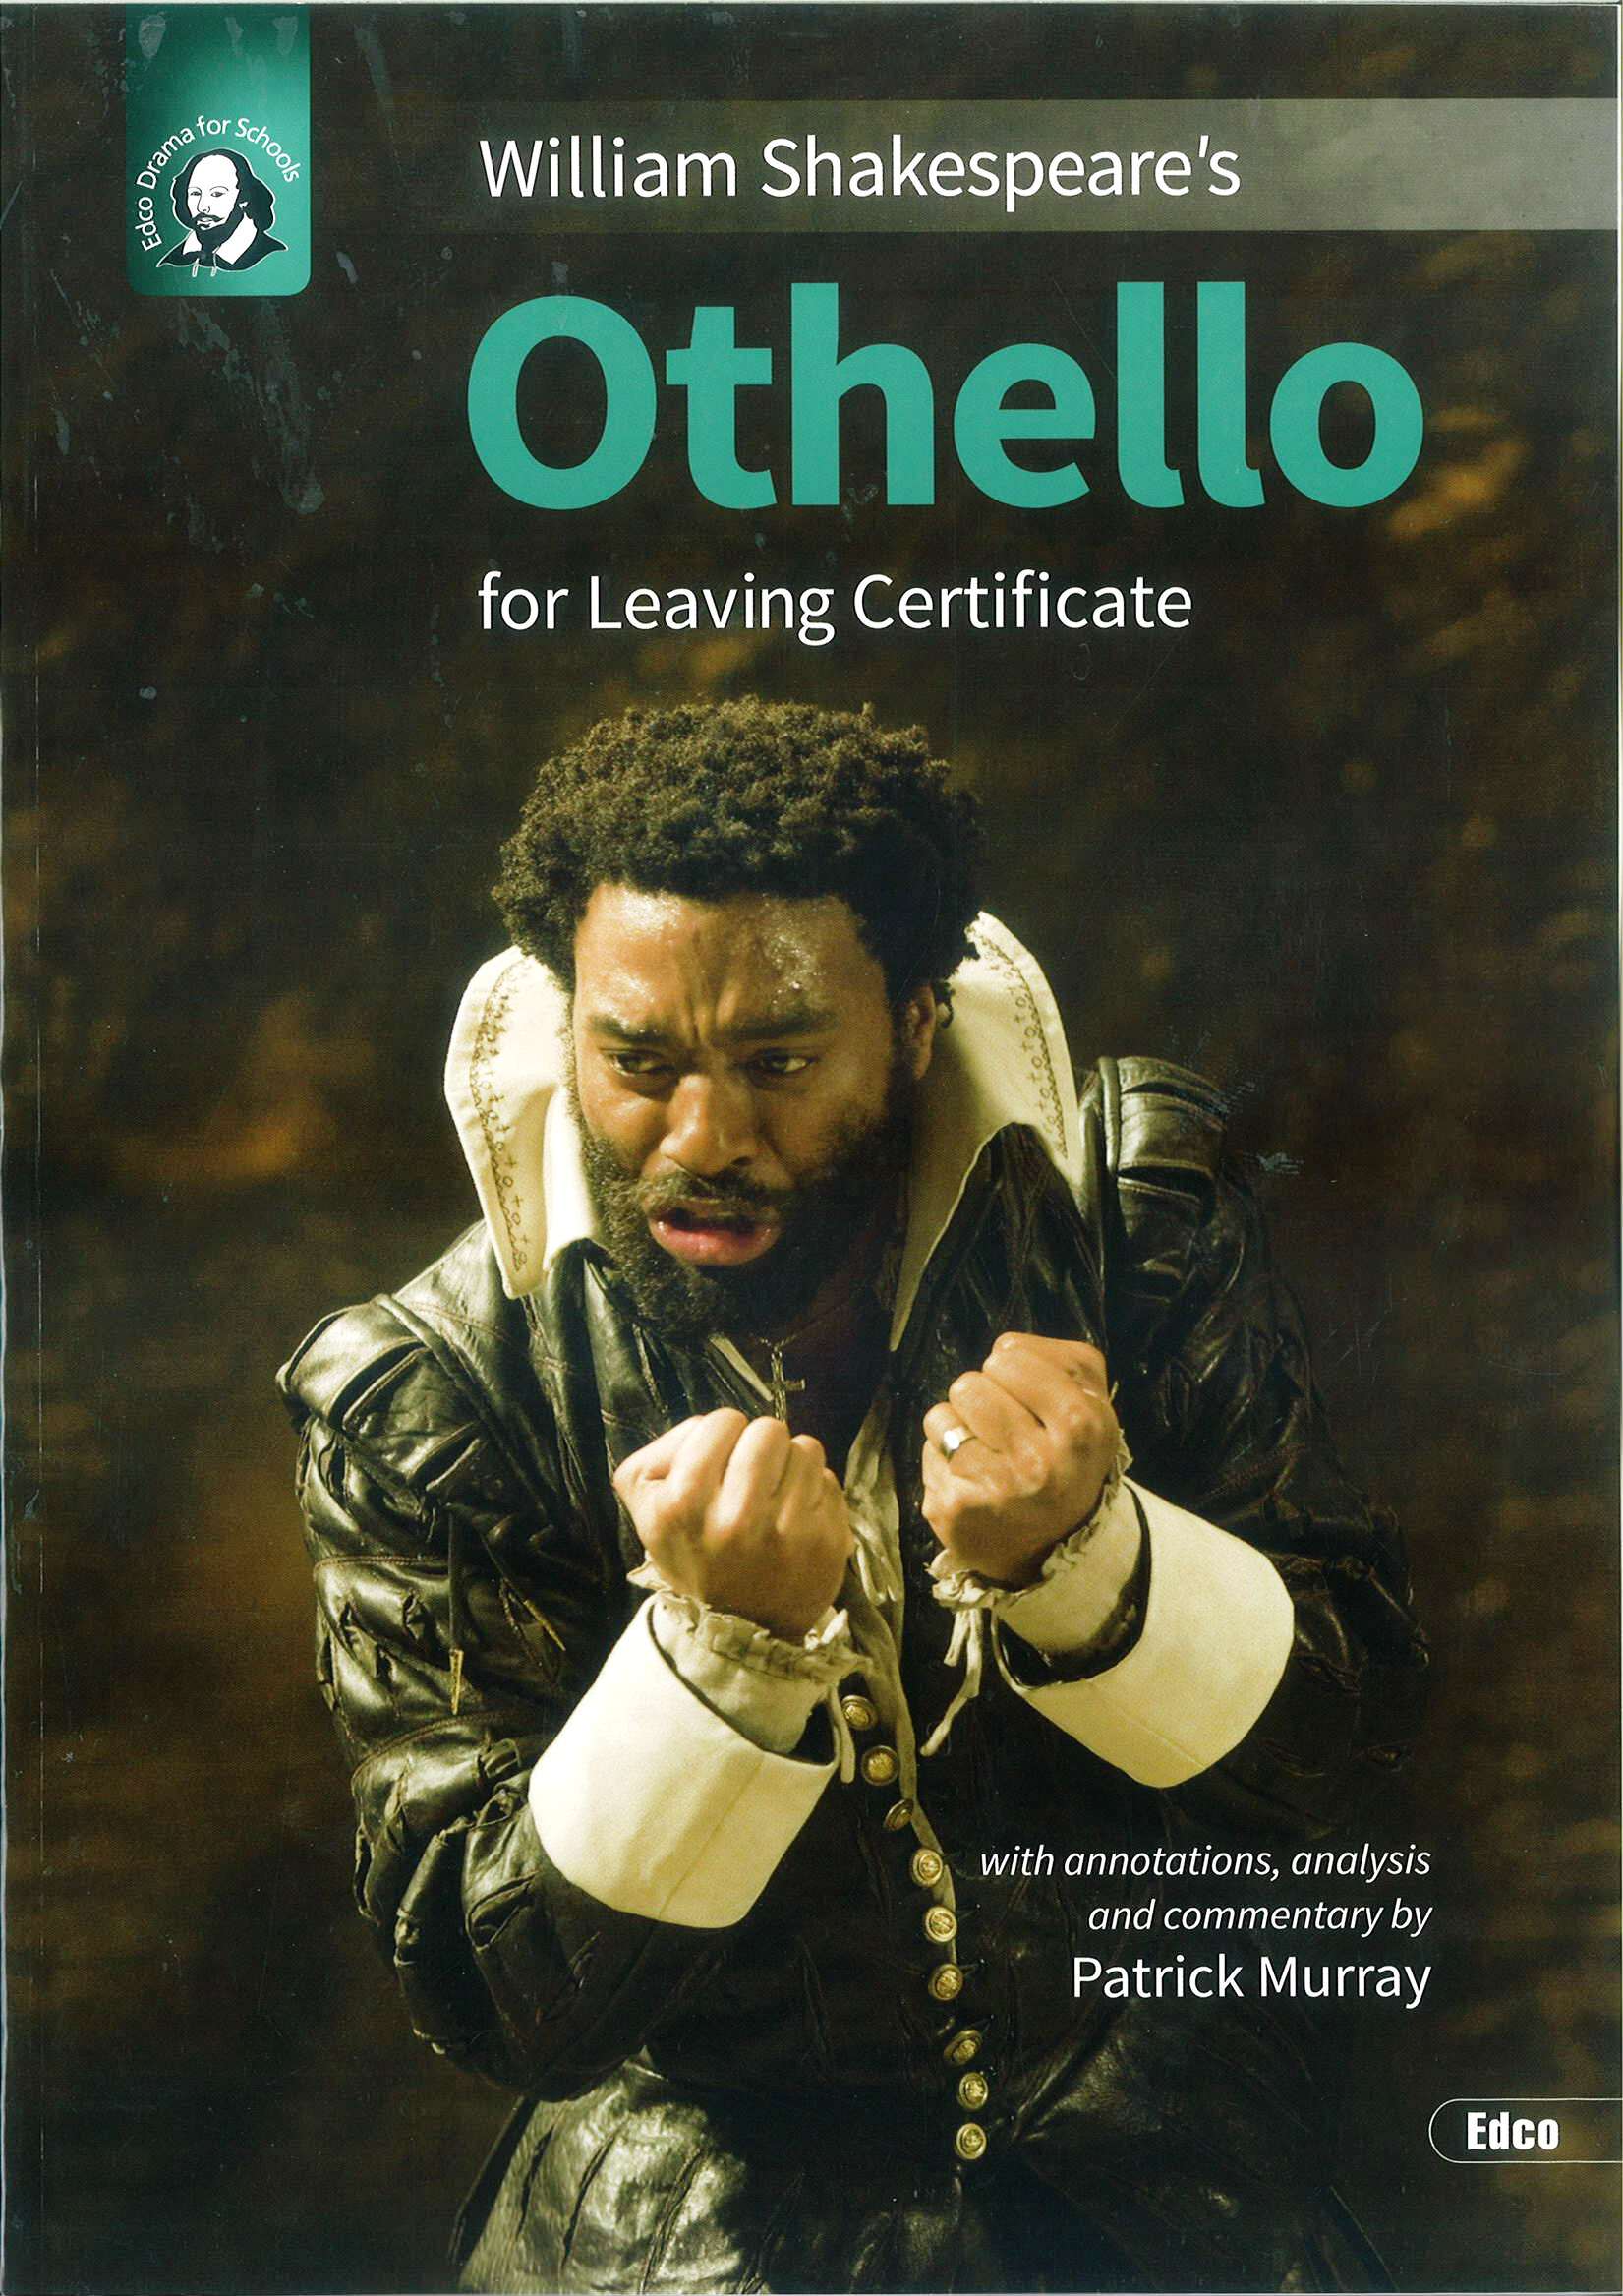 book review on othello